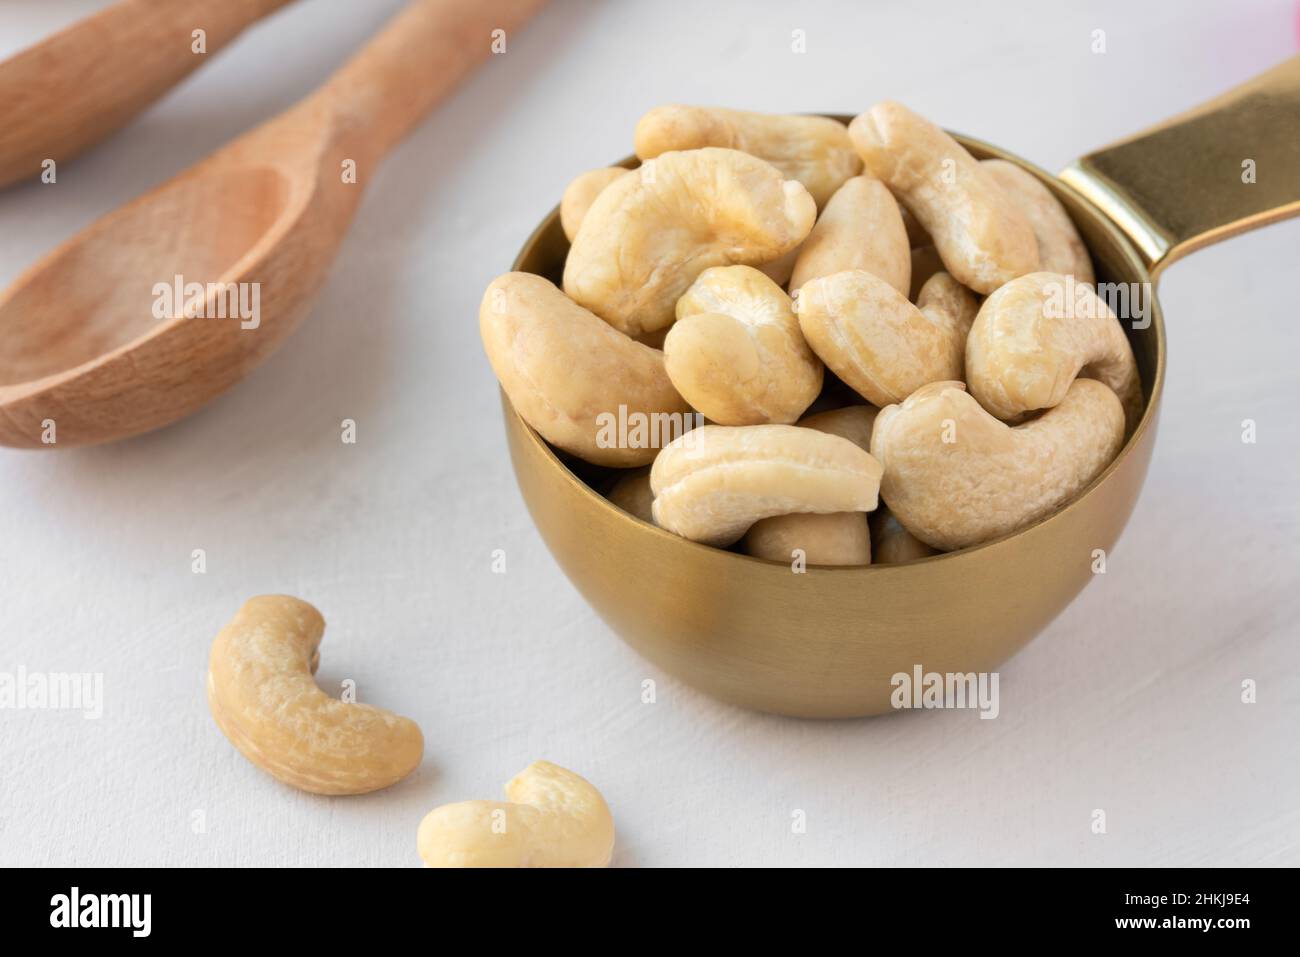 Raw Cashews in a Measuring Cup Stock Photo